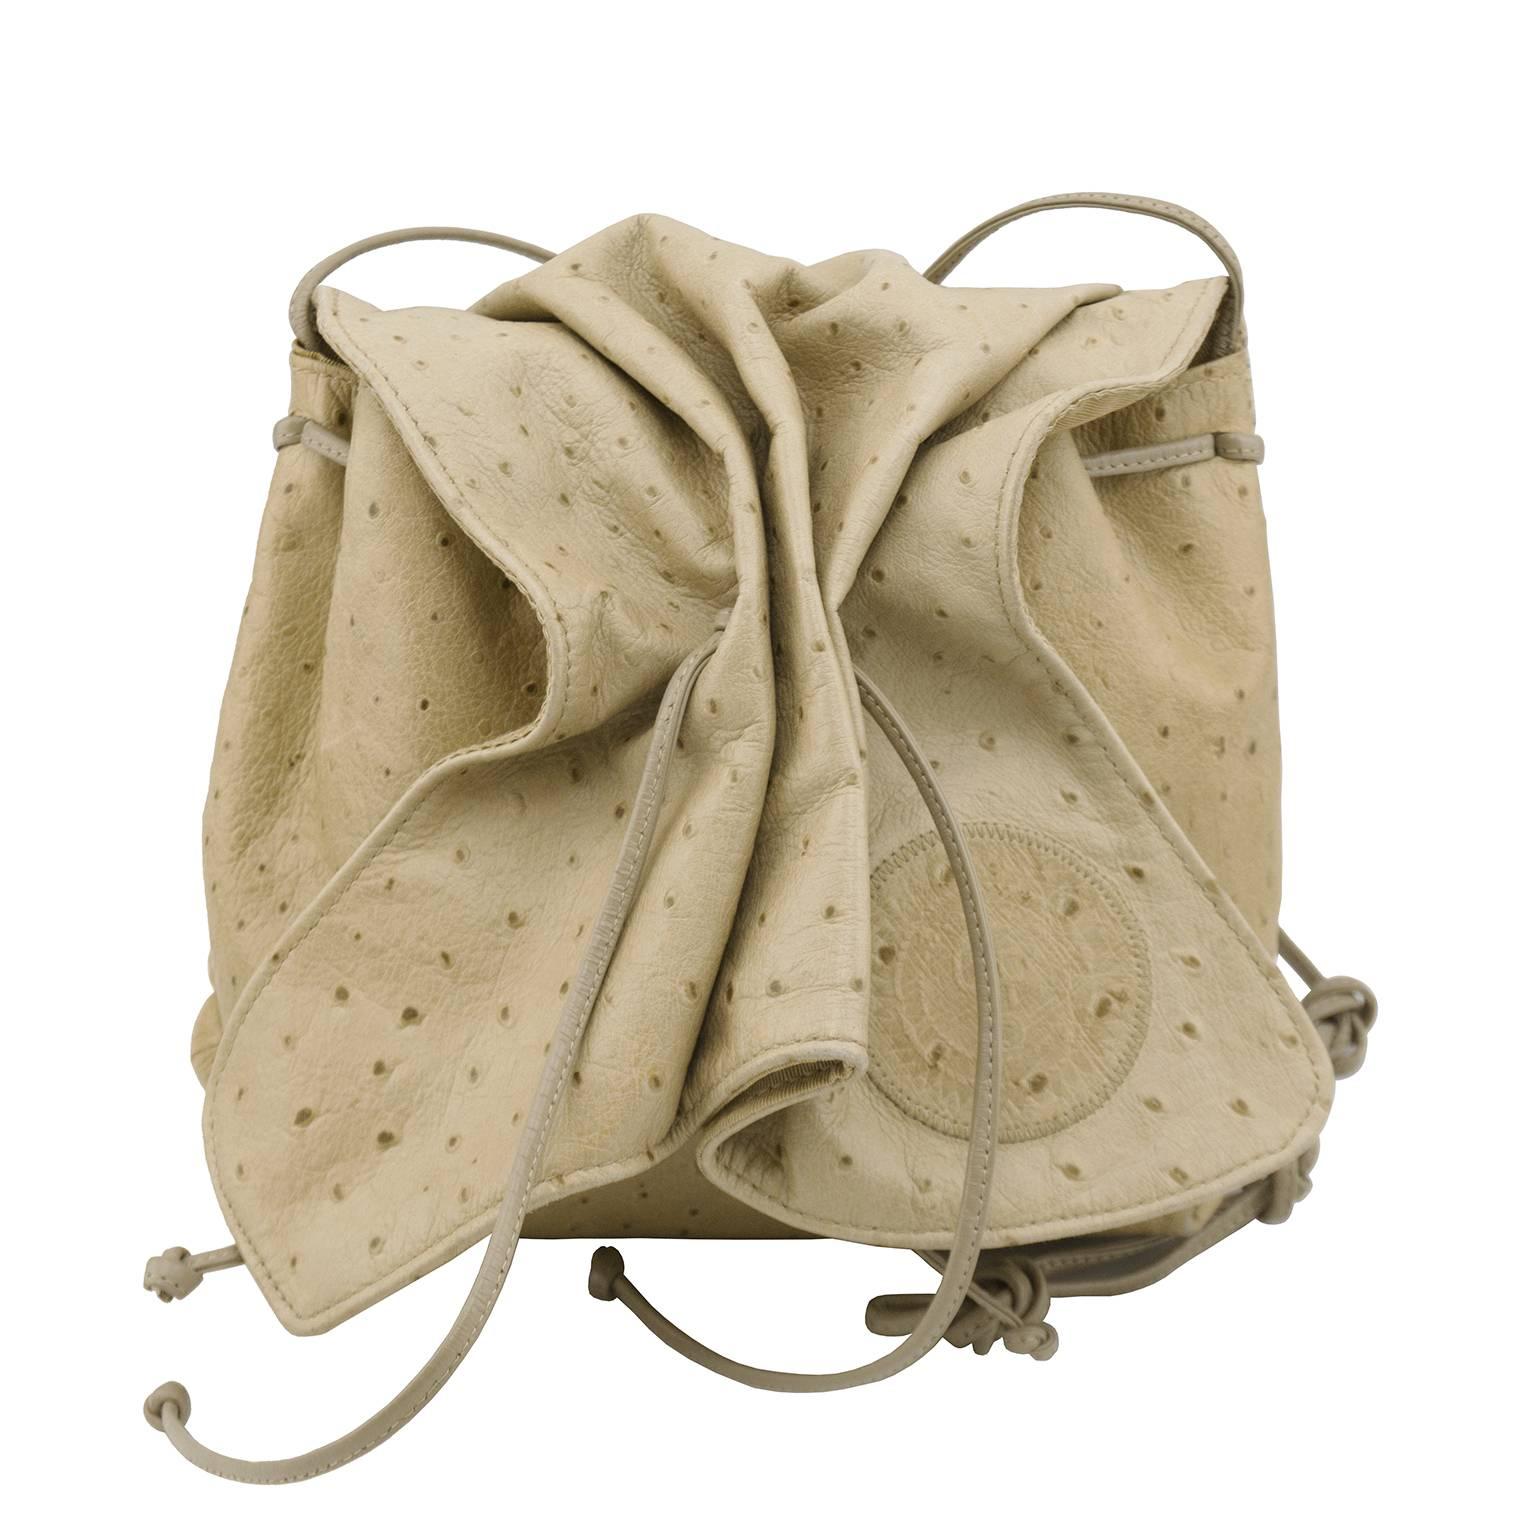 1980's beige Carlos Falchi ostrich mini sac with cross body shoulder strap. Classic draw string style with mini snap hidden closure. Blind stamped intricately patterned patch applied to the corner is classic Falchi ornamentation. Light pink corded